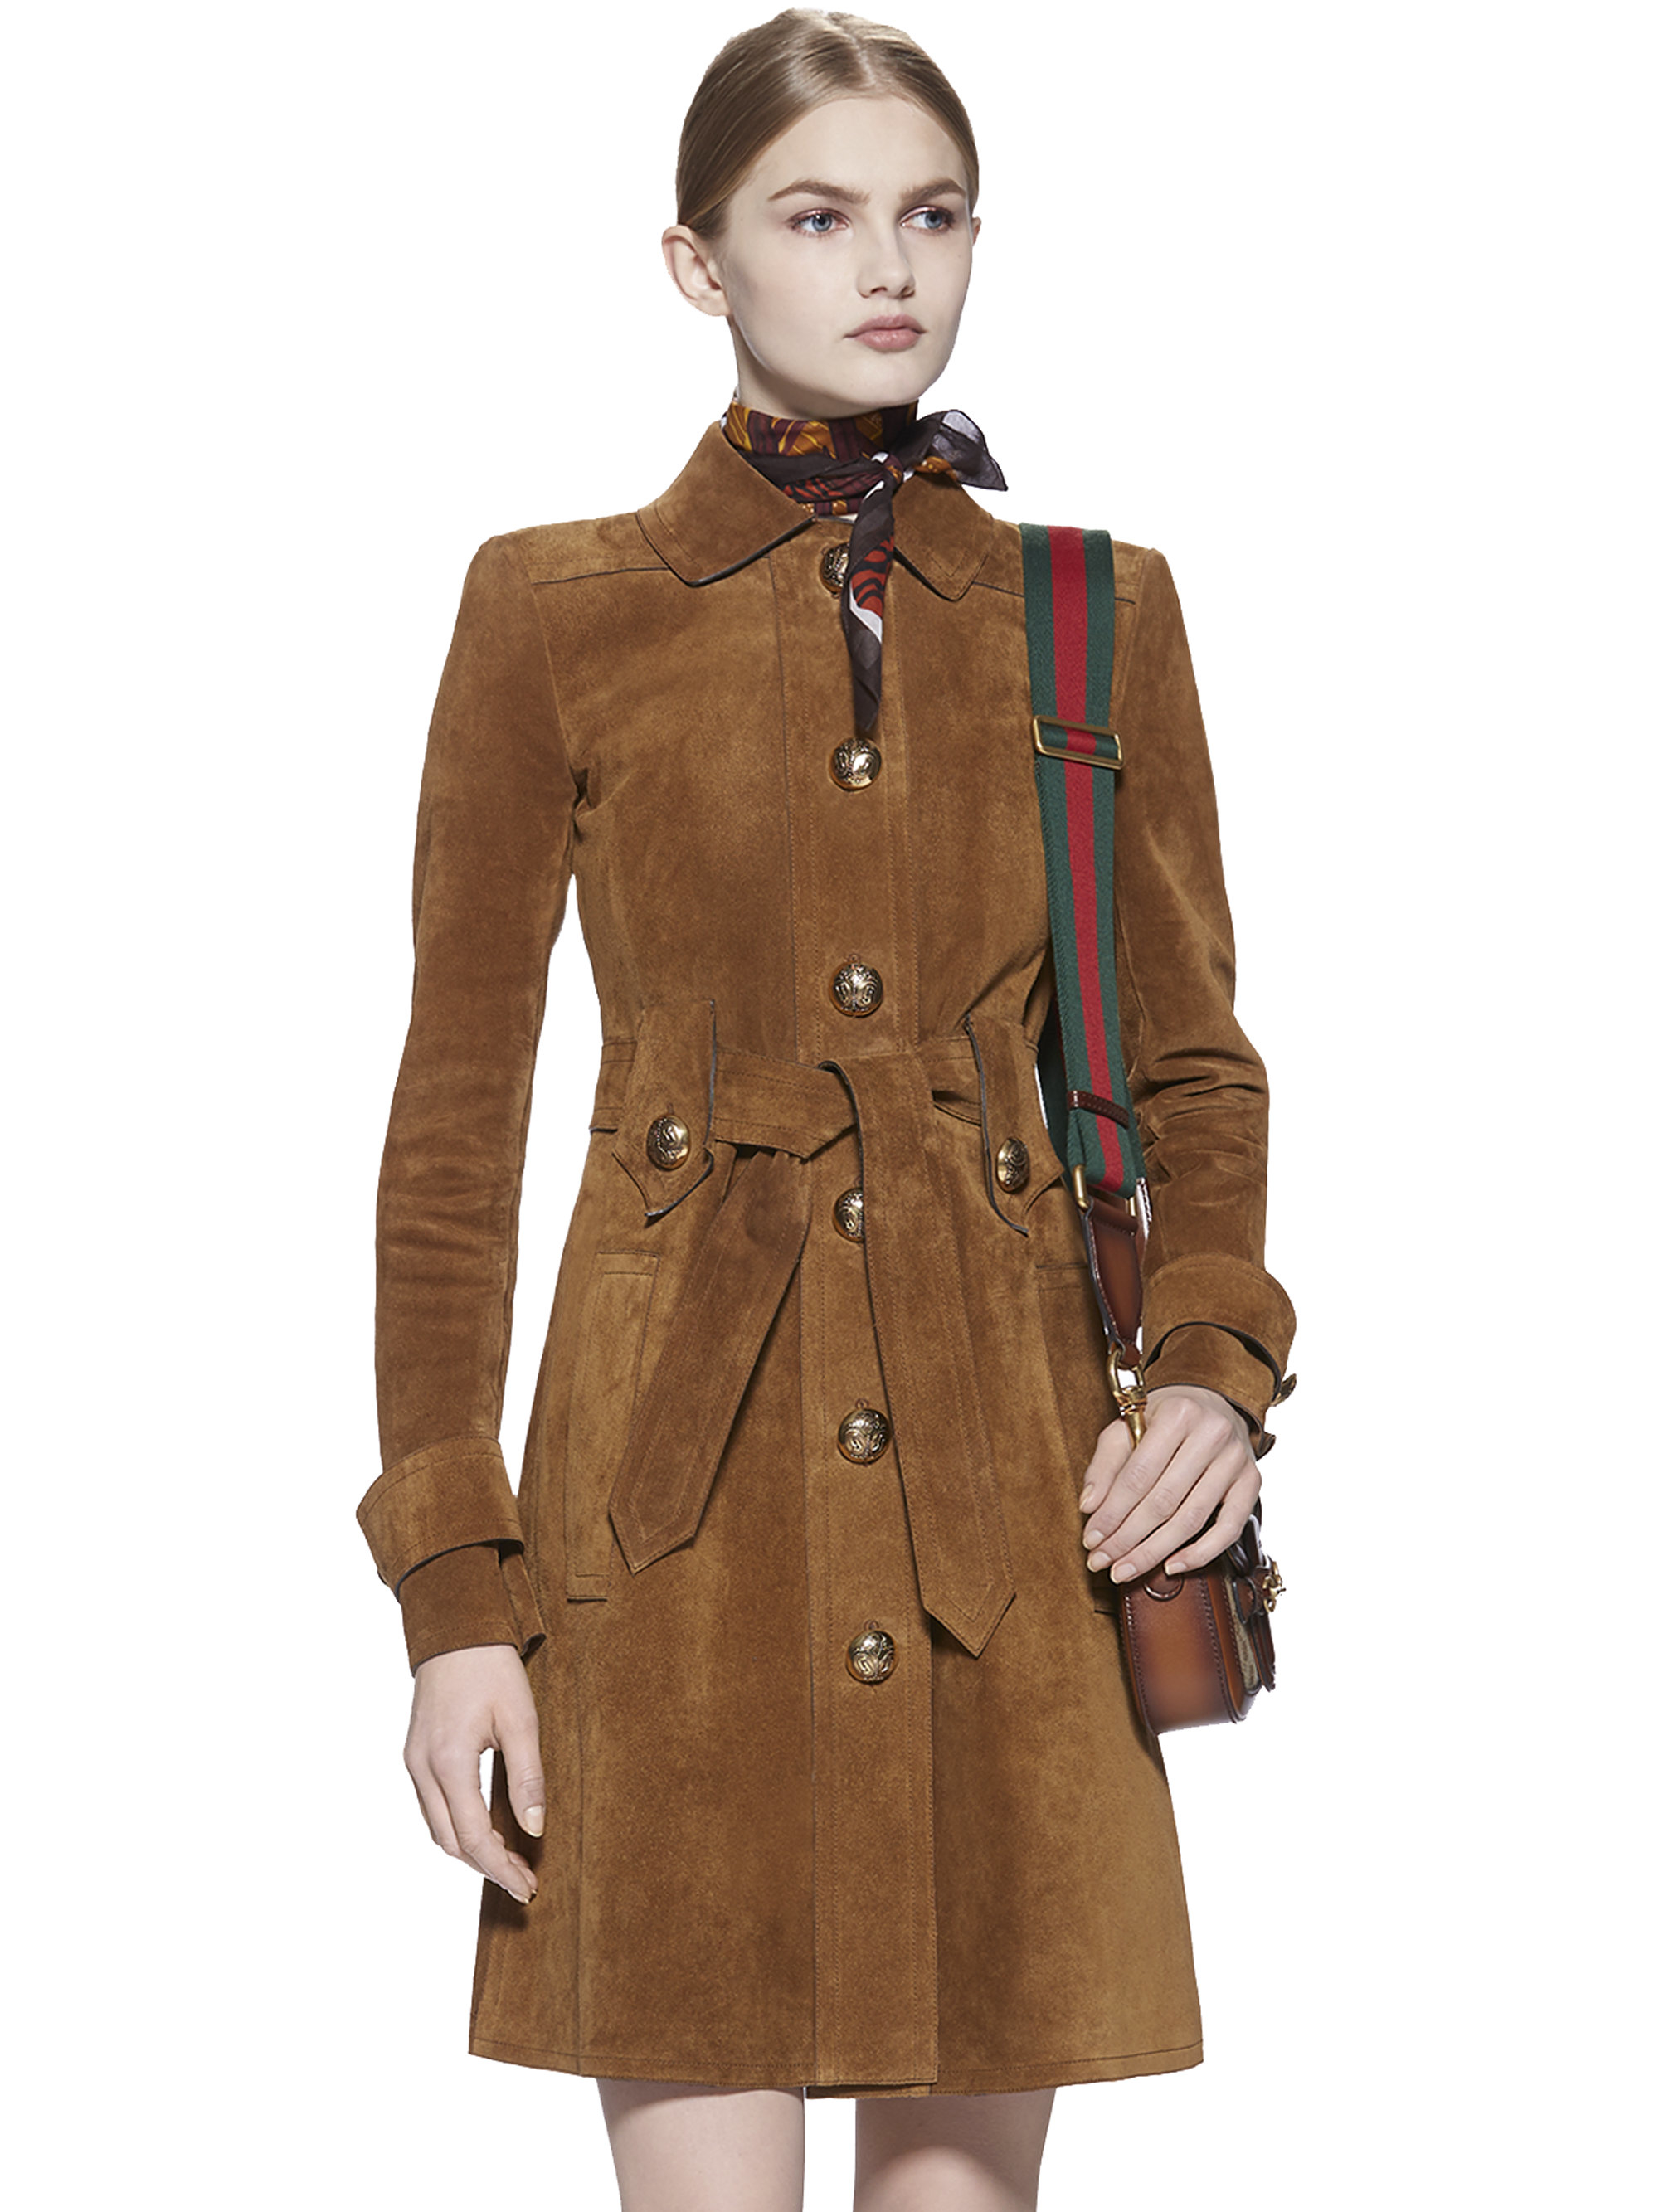 Lyst - Gucci Suede Belted Jacket in Brown